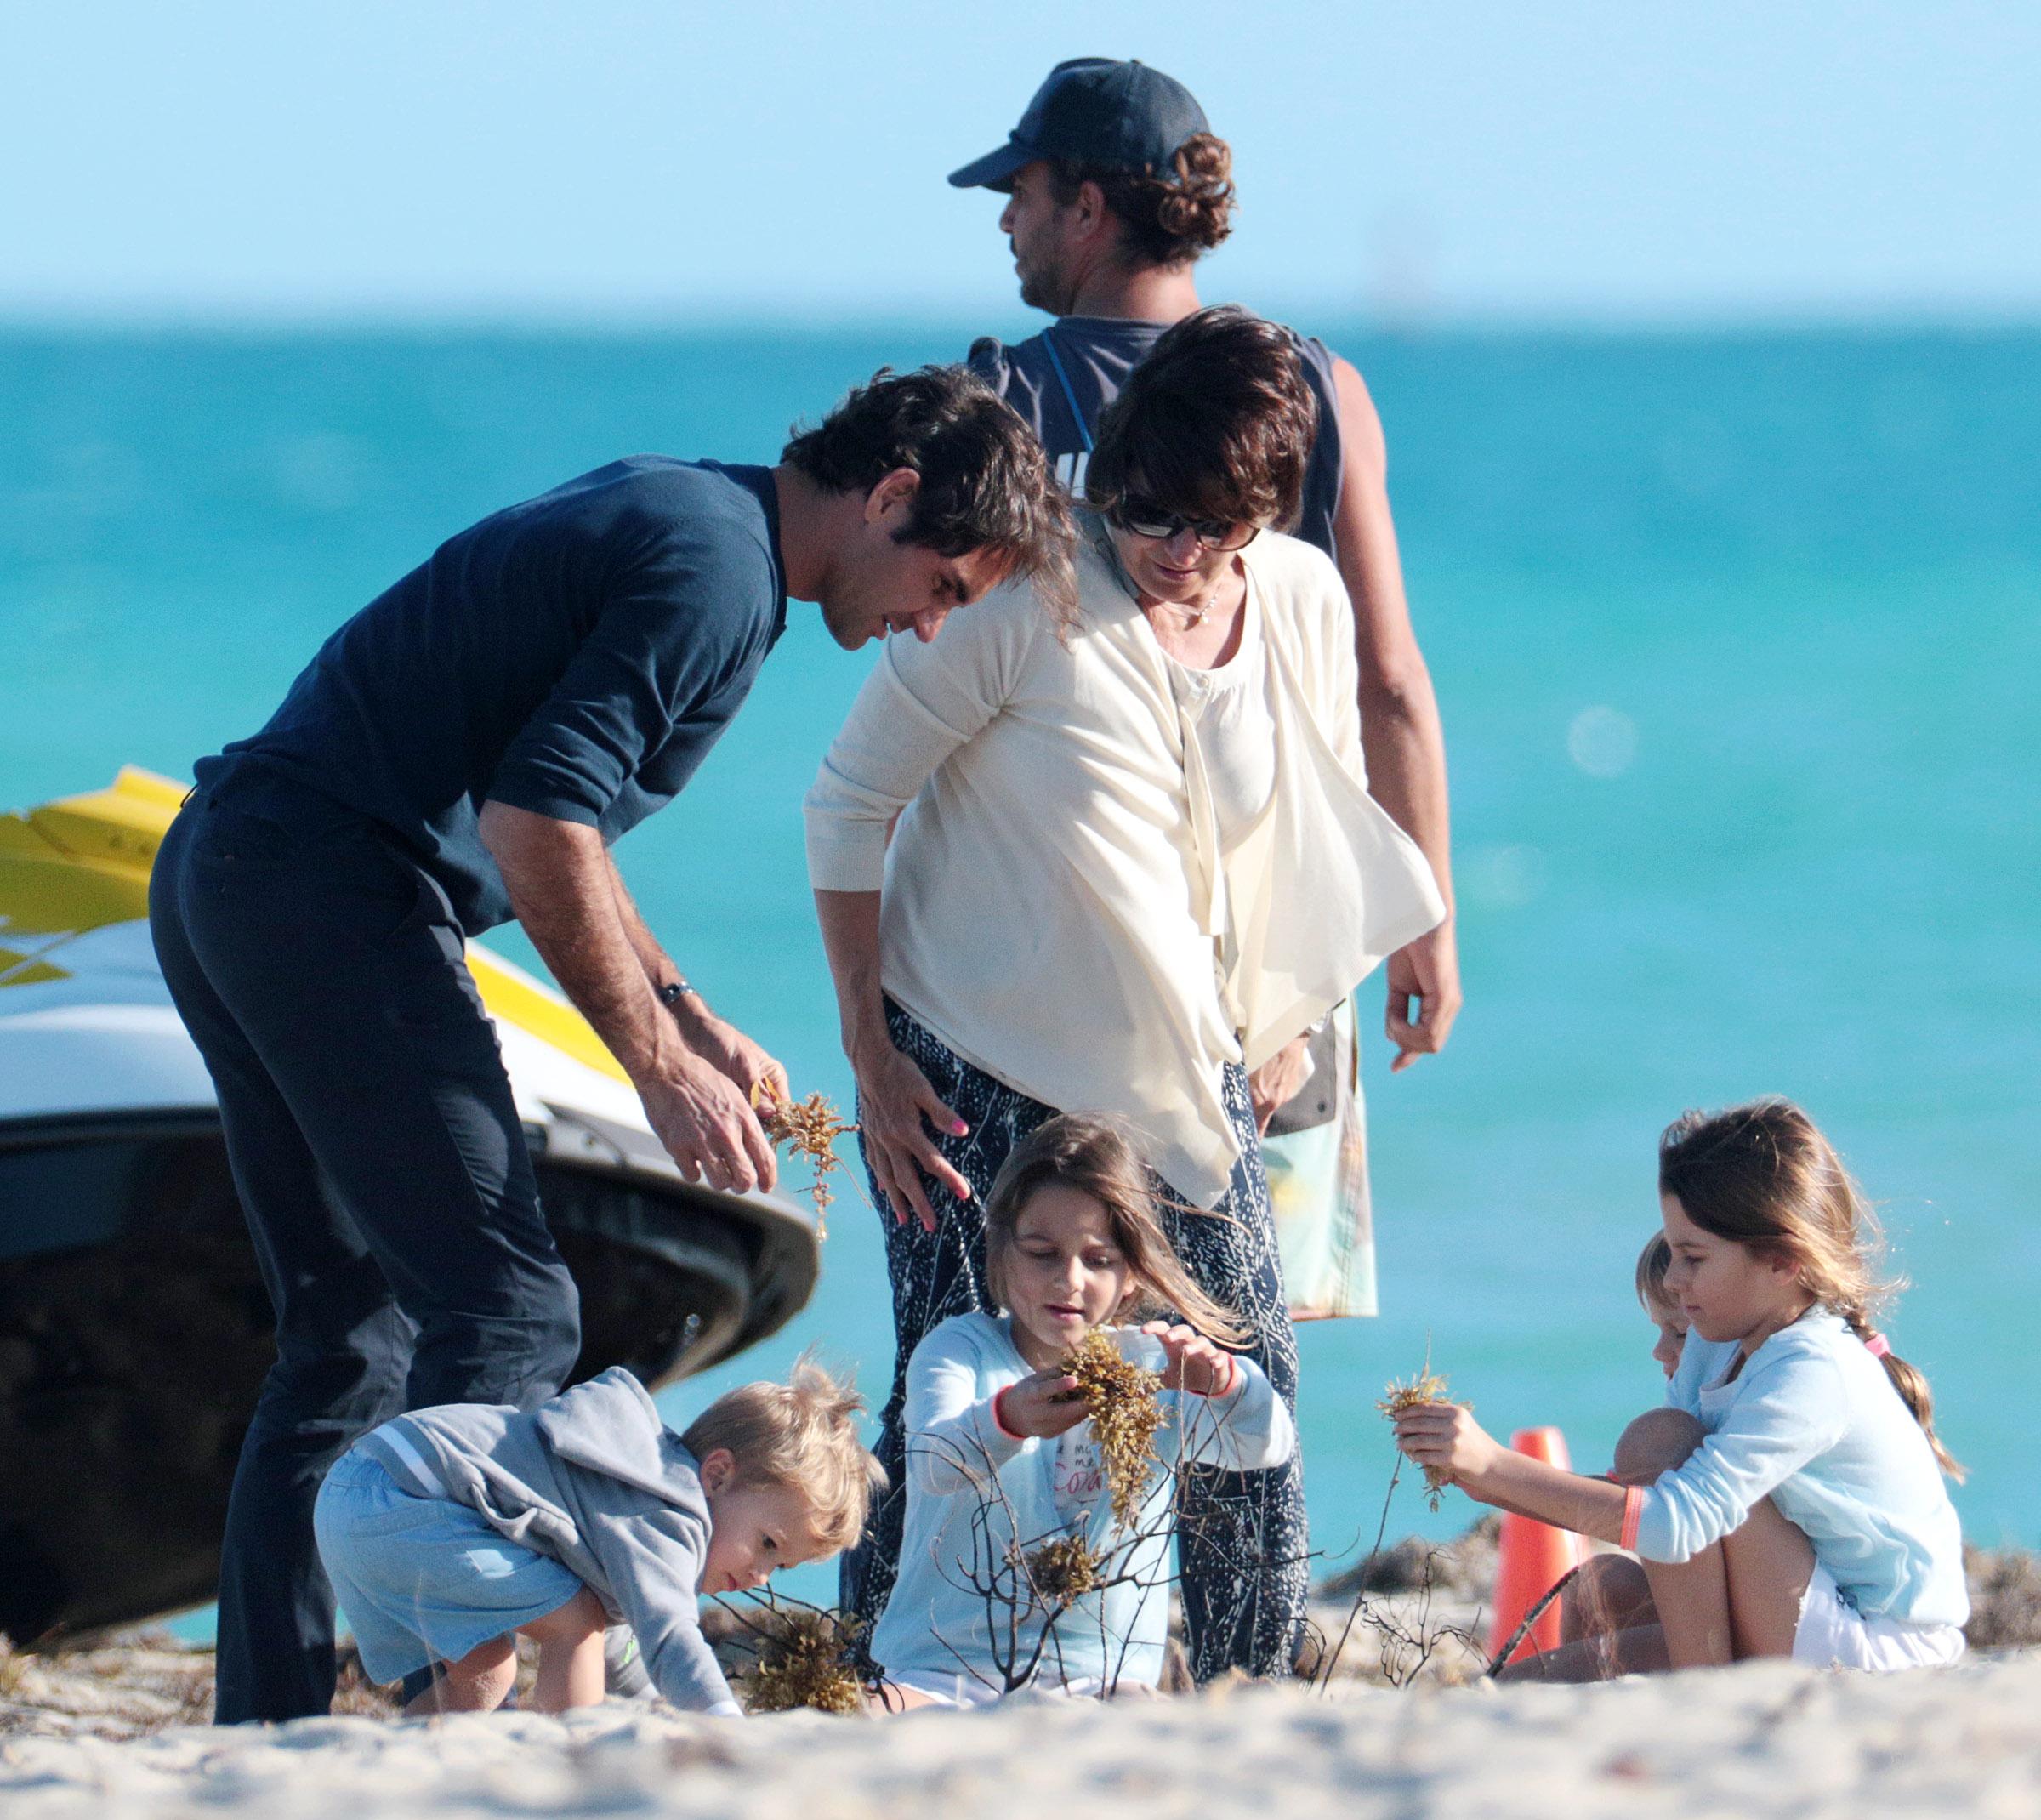 Tennis star Roger Federer with his family at the beach in Miami